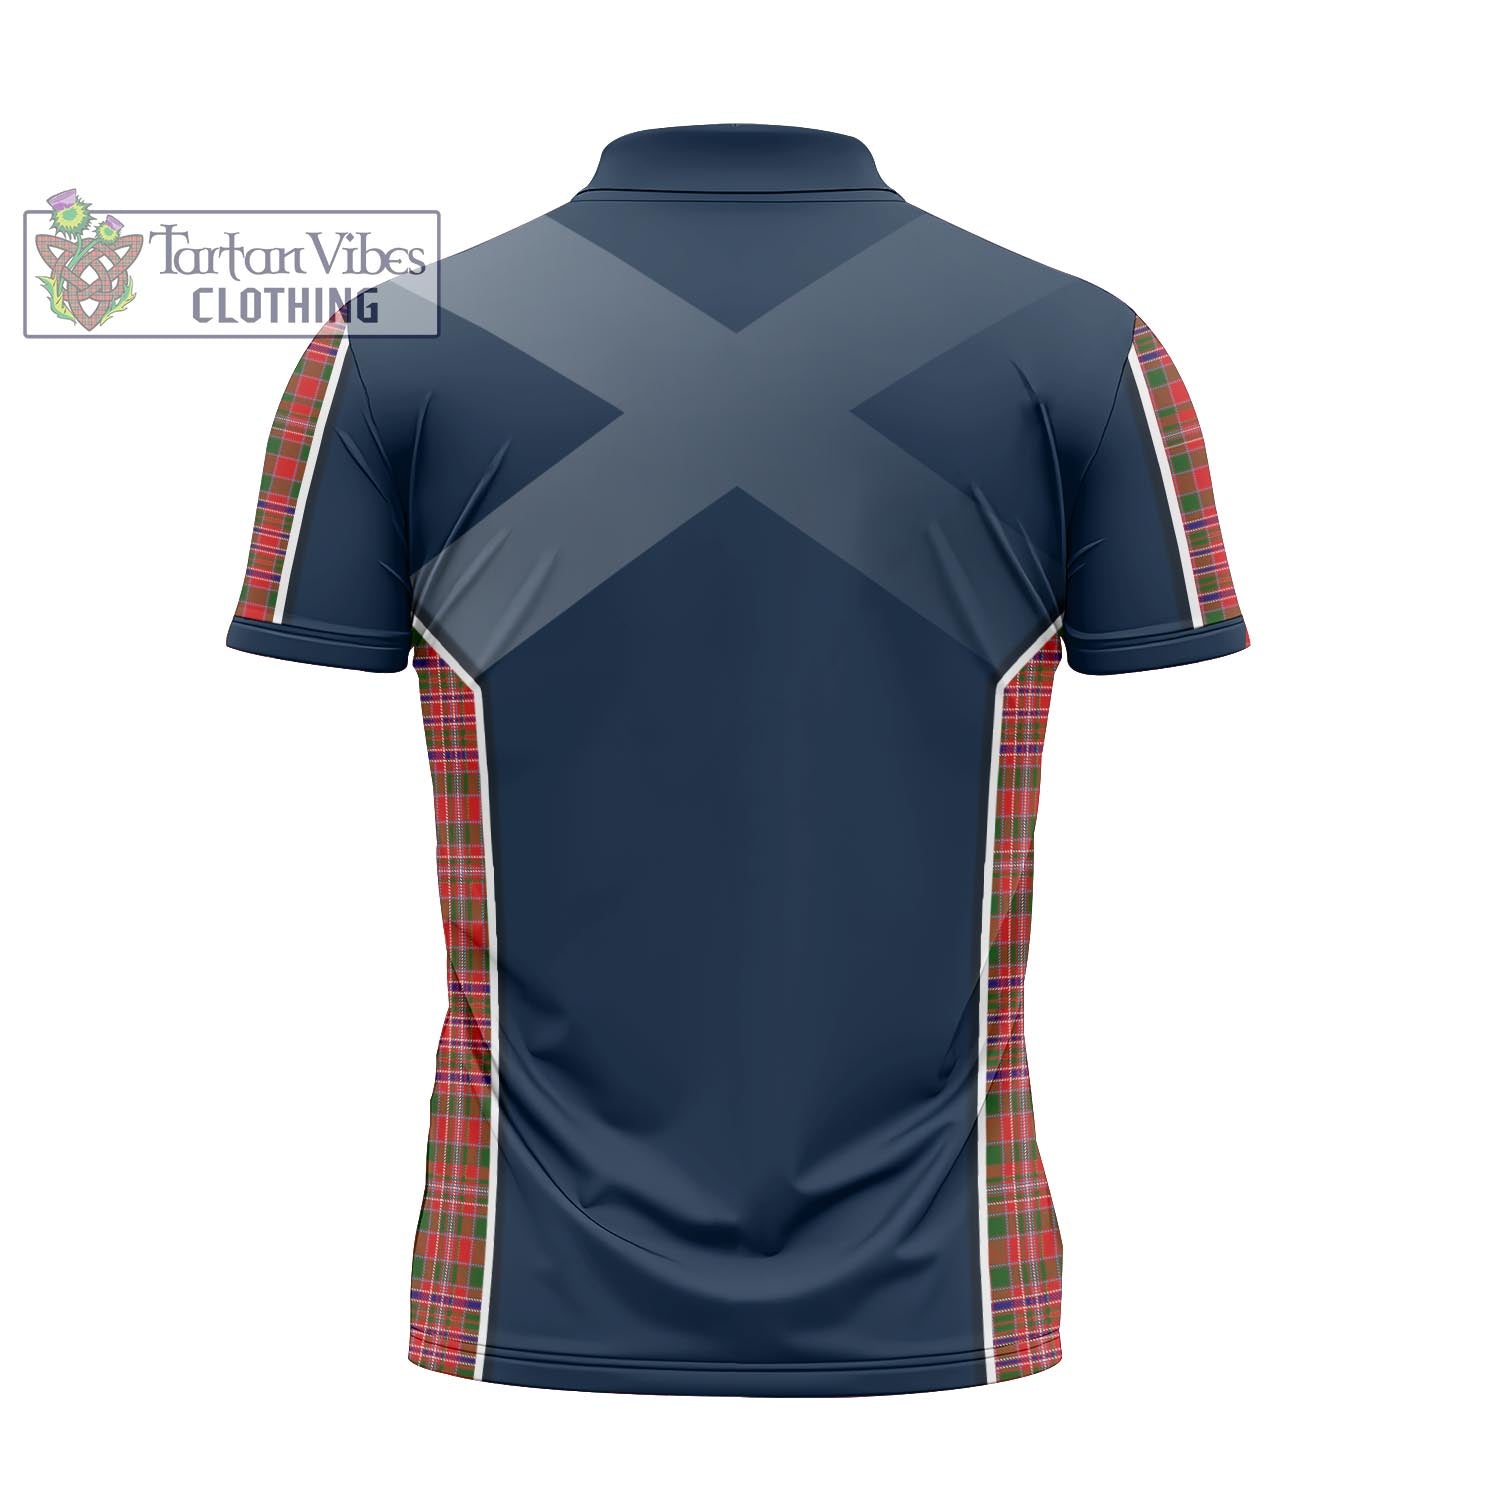 Tartan Vibes Clothing MacAlister Modern Tartan Zipper Polo Shirt with Family Crest and Lion Rampant Vibes Sport Style